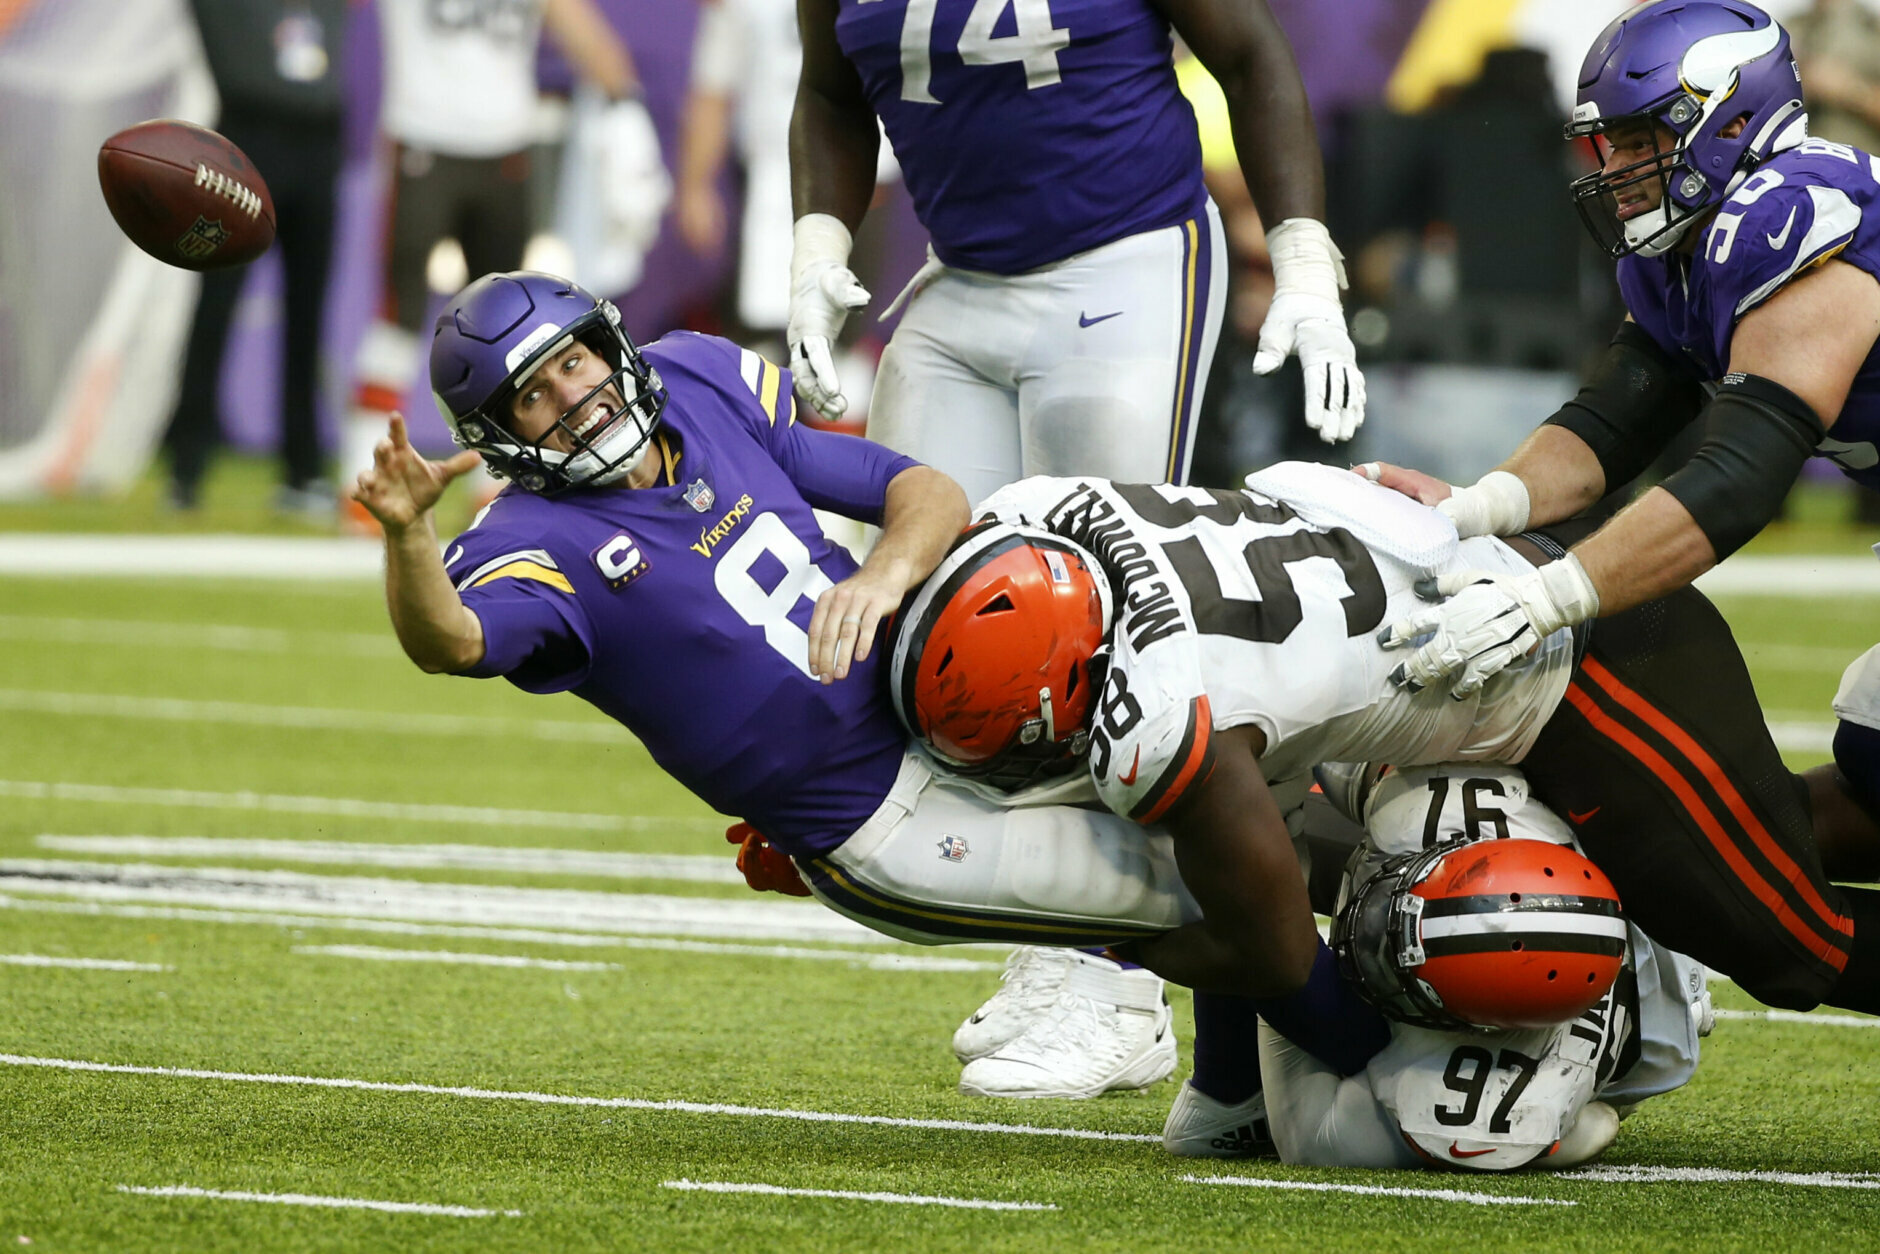 <p><b><i>Browns 14</i></b><br />
<b><i>Vikings 7</i></b></p>
<p>Given all <a href="https://www.twincities.com/2021/09/29/now-coaching-browns-kevin-stefanski-returns-to-special-place-to-face-vikings/">the talk of the offensive-minded Kevin Stefanski&#8217;s return to Minnesota</a>, it was somehow fitting that the Browns defense is what carried Cleveland to victory over a Vikings team <a href="https://profootballtalk.nbcsports.com/2021/09/27/mike-zimmer-sunday-was-best-offensive-performance-since-i-became-vikings-head-coach/">coming off its best offensive performance in years</a>. But Baker Mayfield better bring a better game to L.A. against the Chargers.</p>
